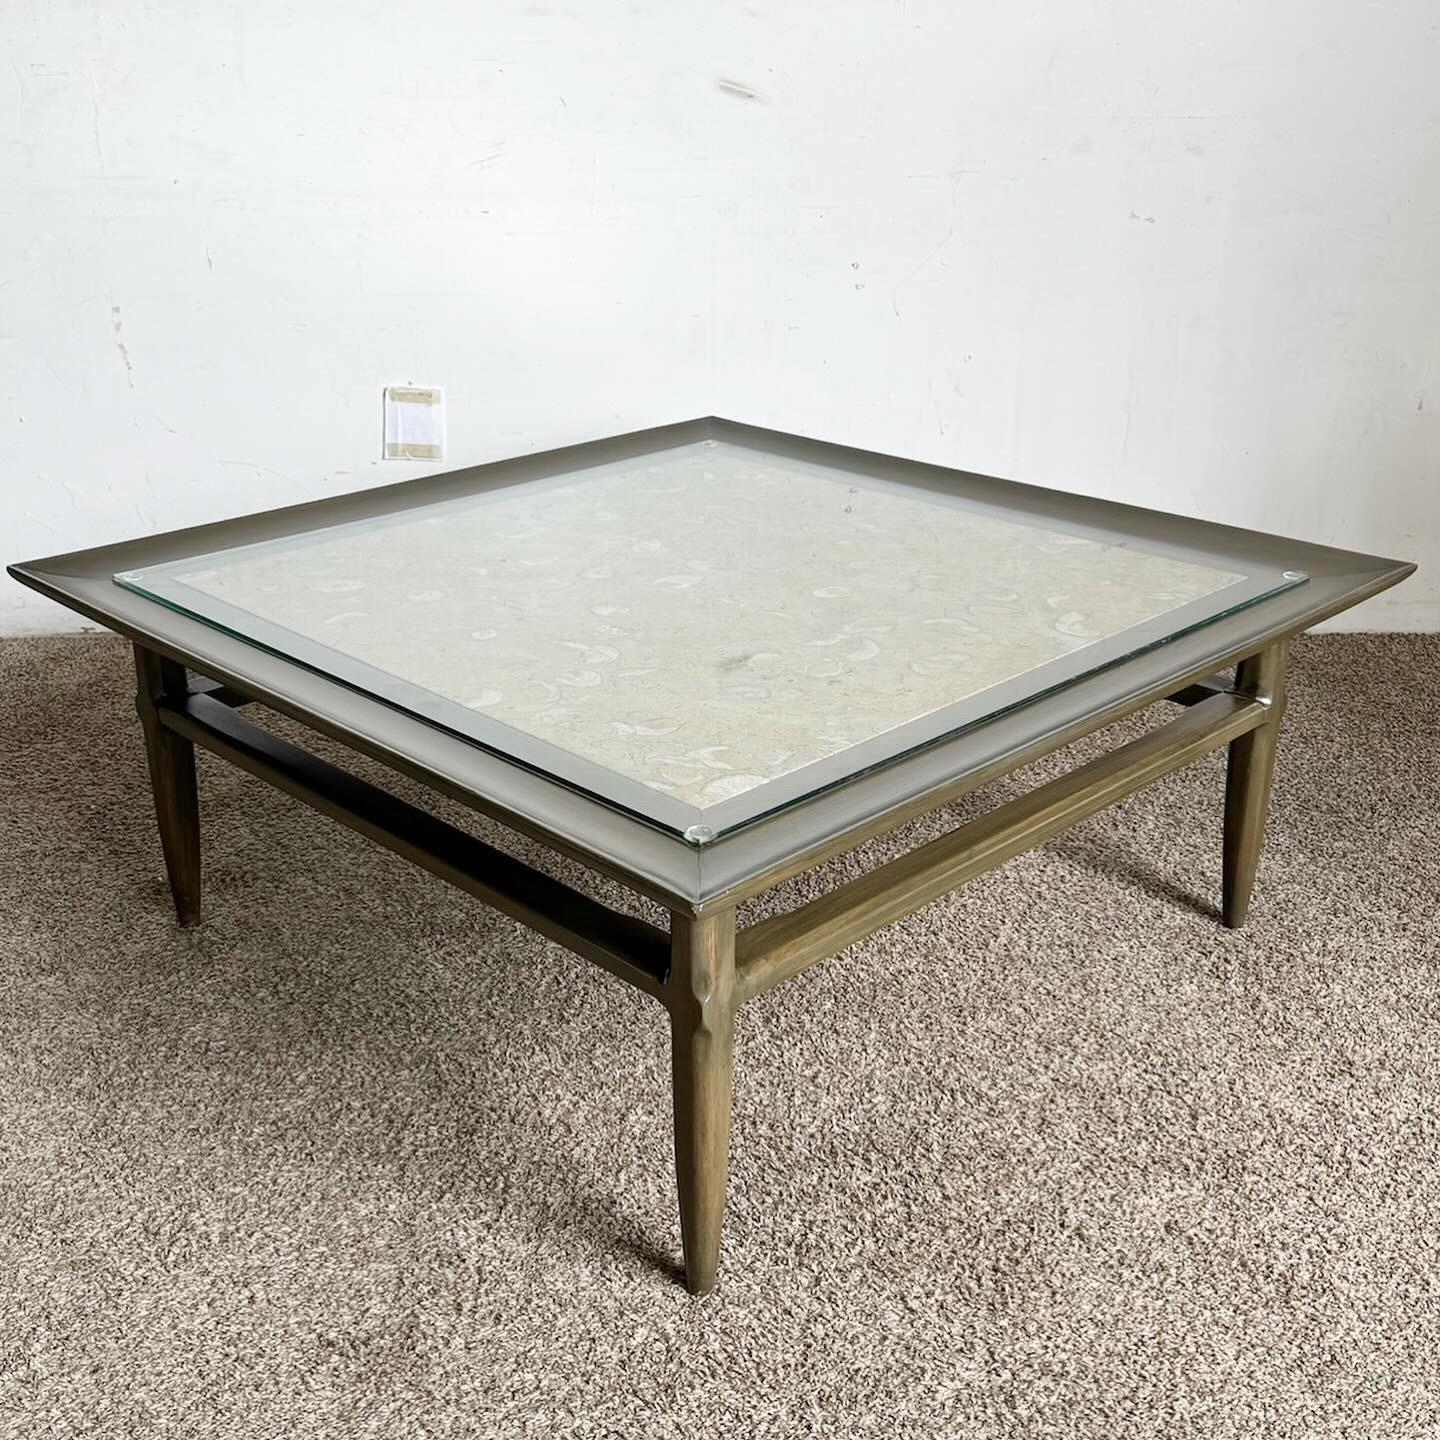 The Mid Century Modern Wooden Square Coffee Table, with its exquisite Portuguese marble inlay top, offers a blend of luxury and mid-century style. The sturdy wooden base complements the unique marble patterns, creating an eye-catching centerpiece.